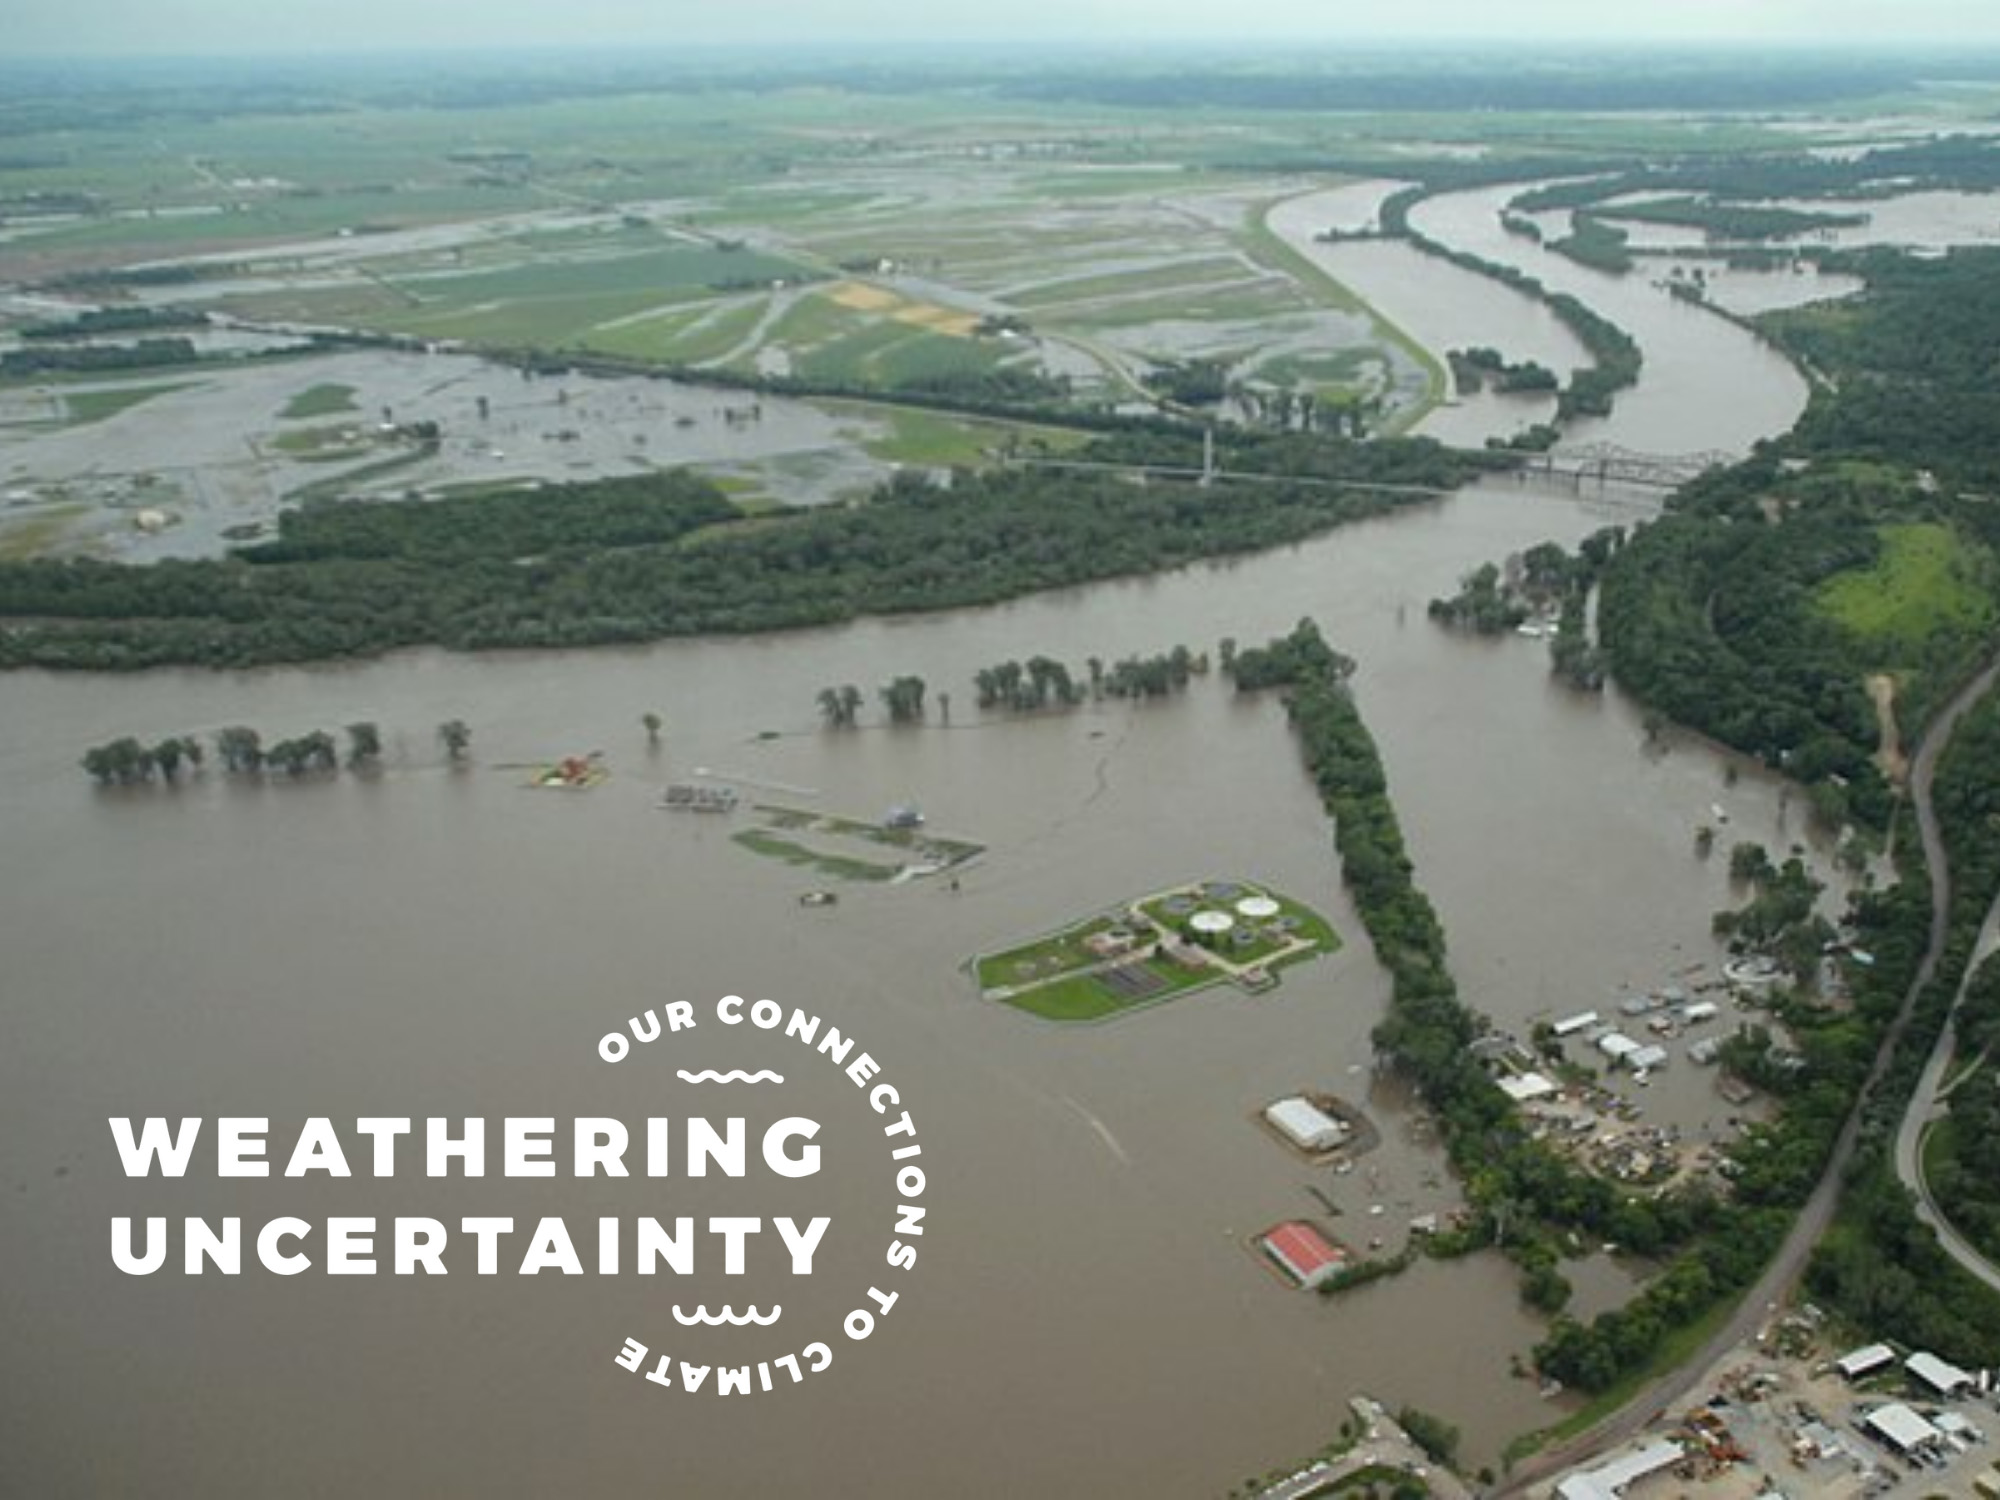 The publication photo for the Humanities Nebraska event "Weathering Uncertainty: Conversations about Climate in Nebraska" featuring a close-up of the Missouri River's flooding from 2019.